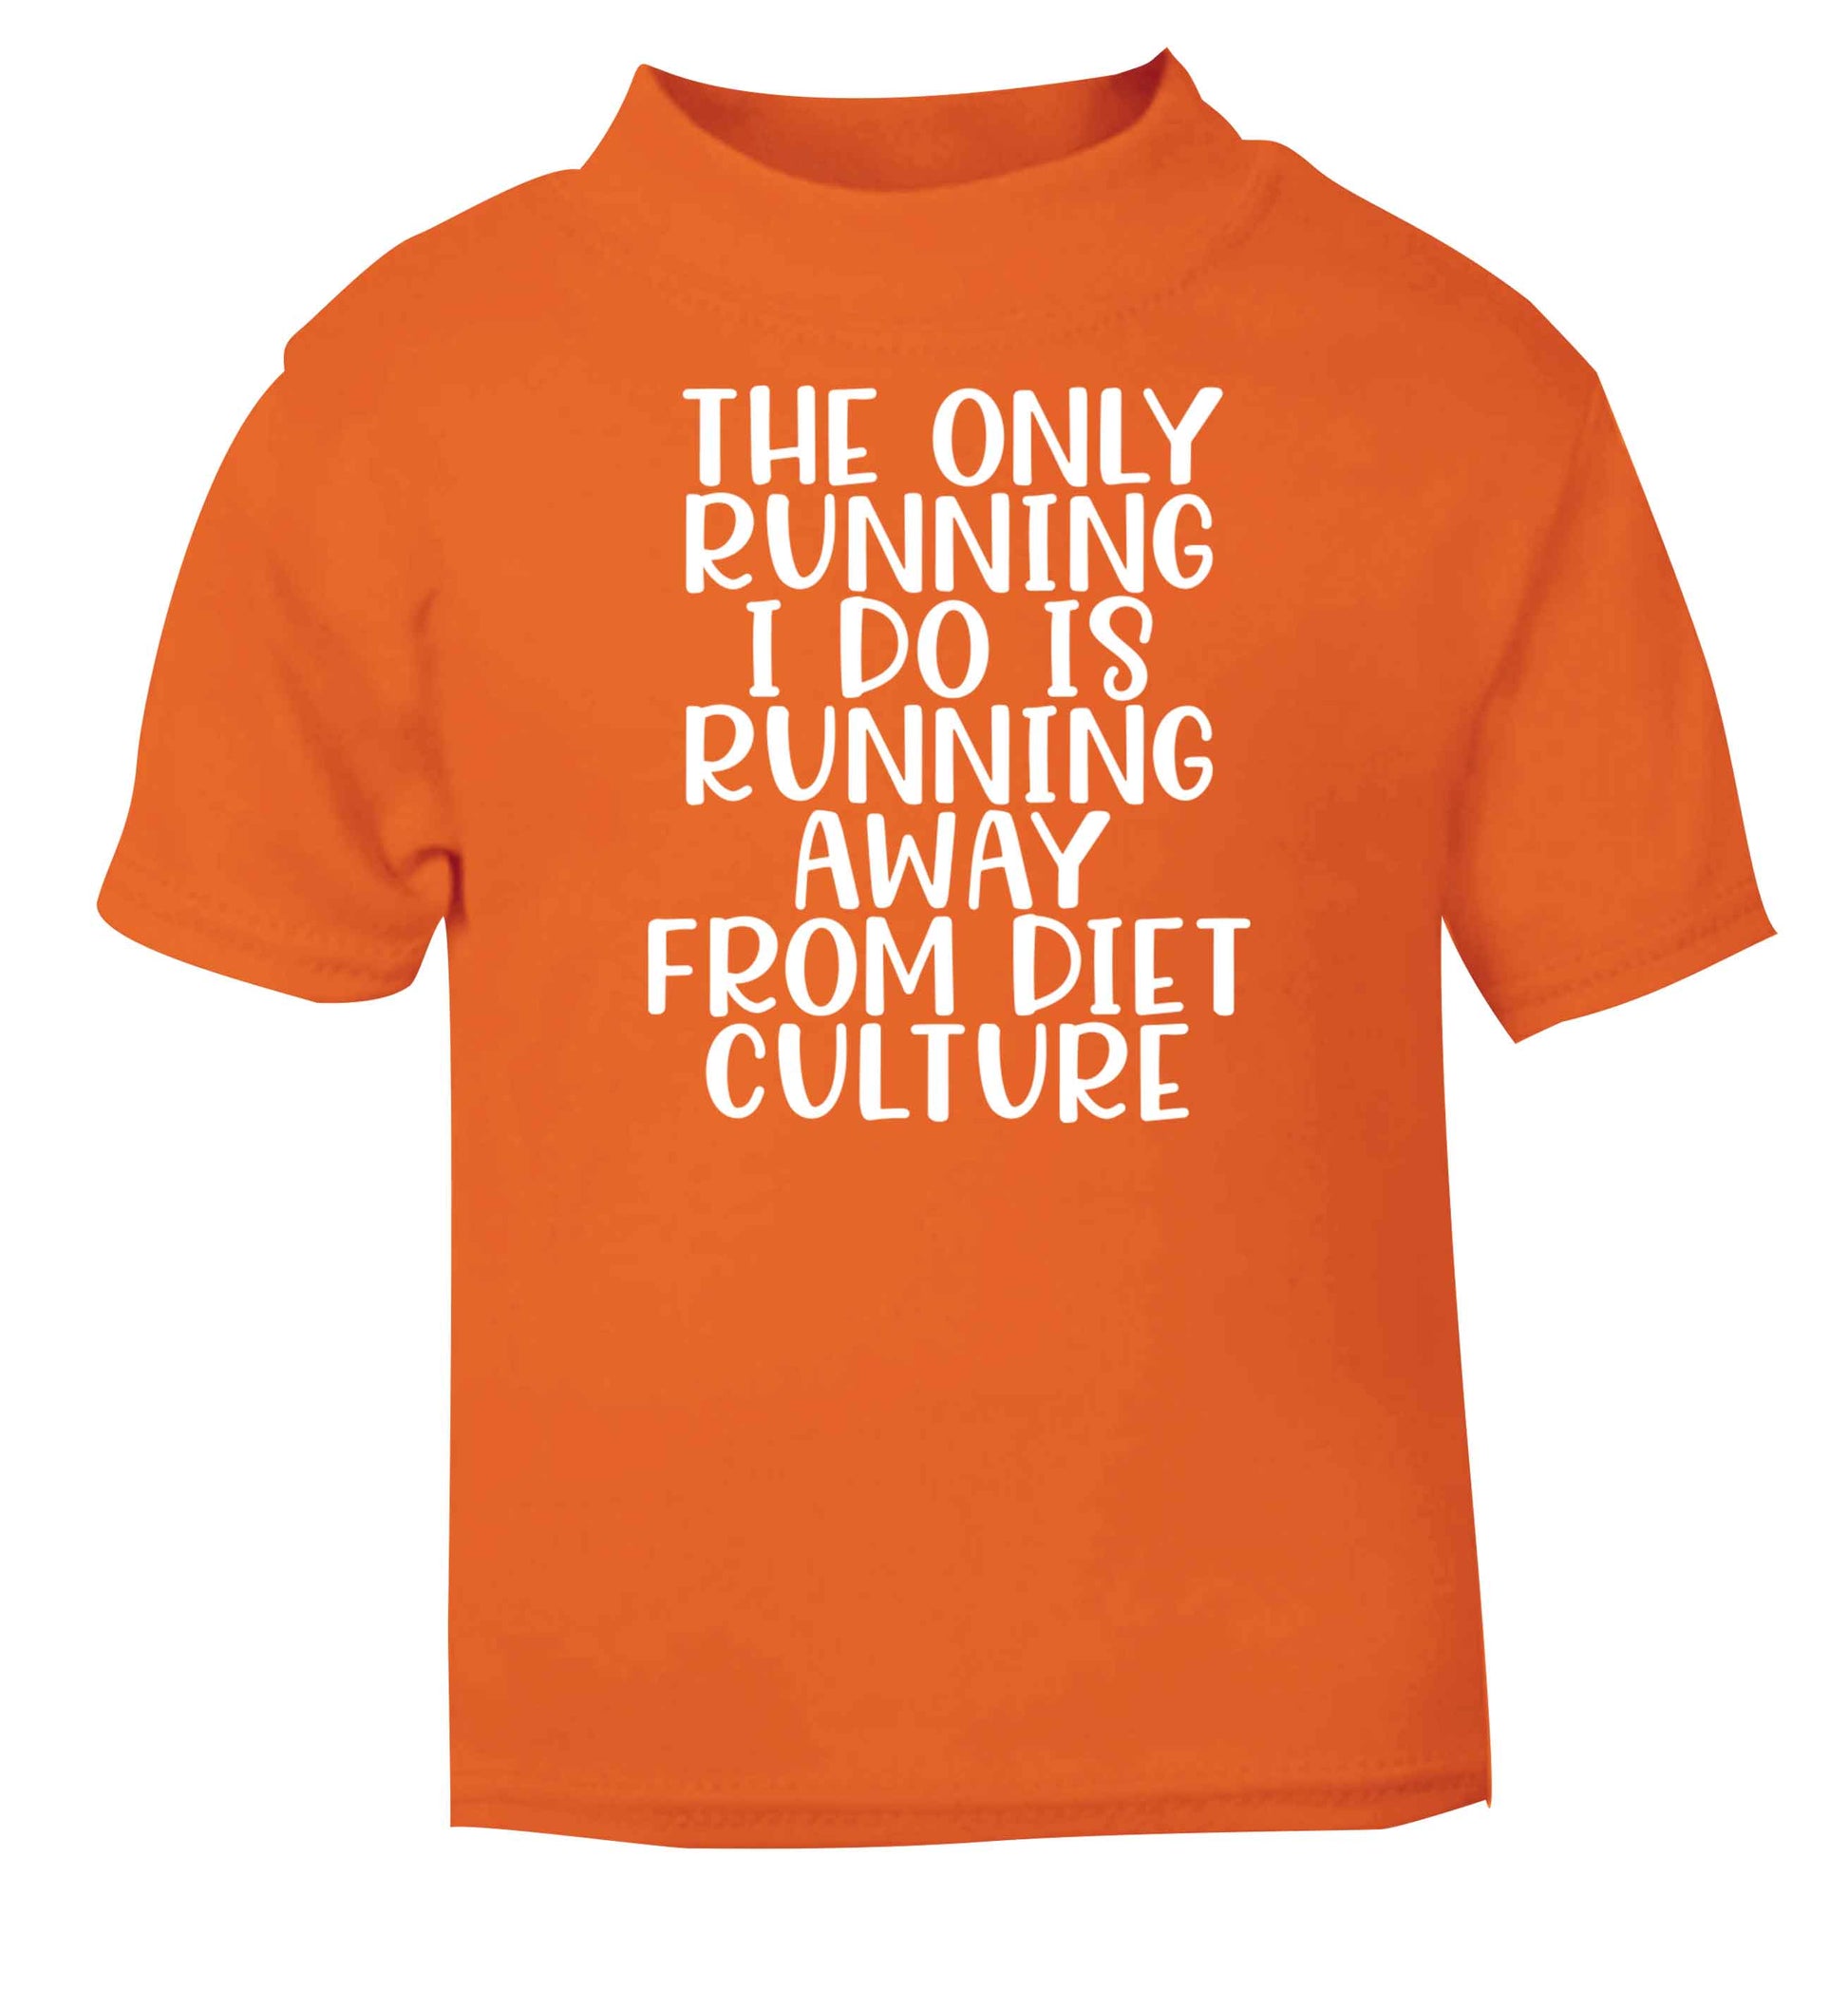 The only running I do is running away from diet culture orange baby toddler Tshirt 2 Years